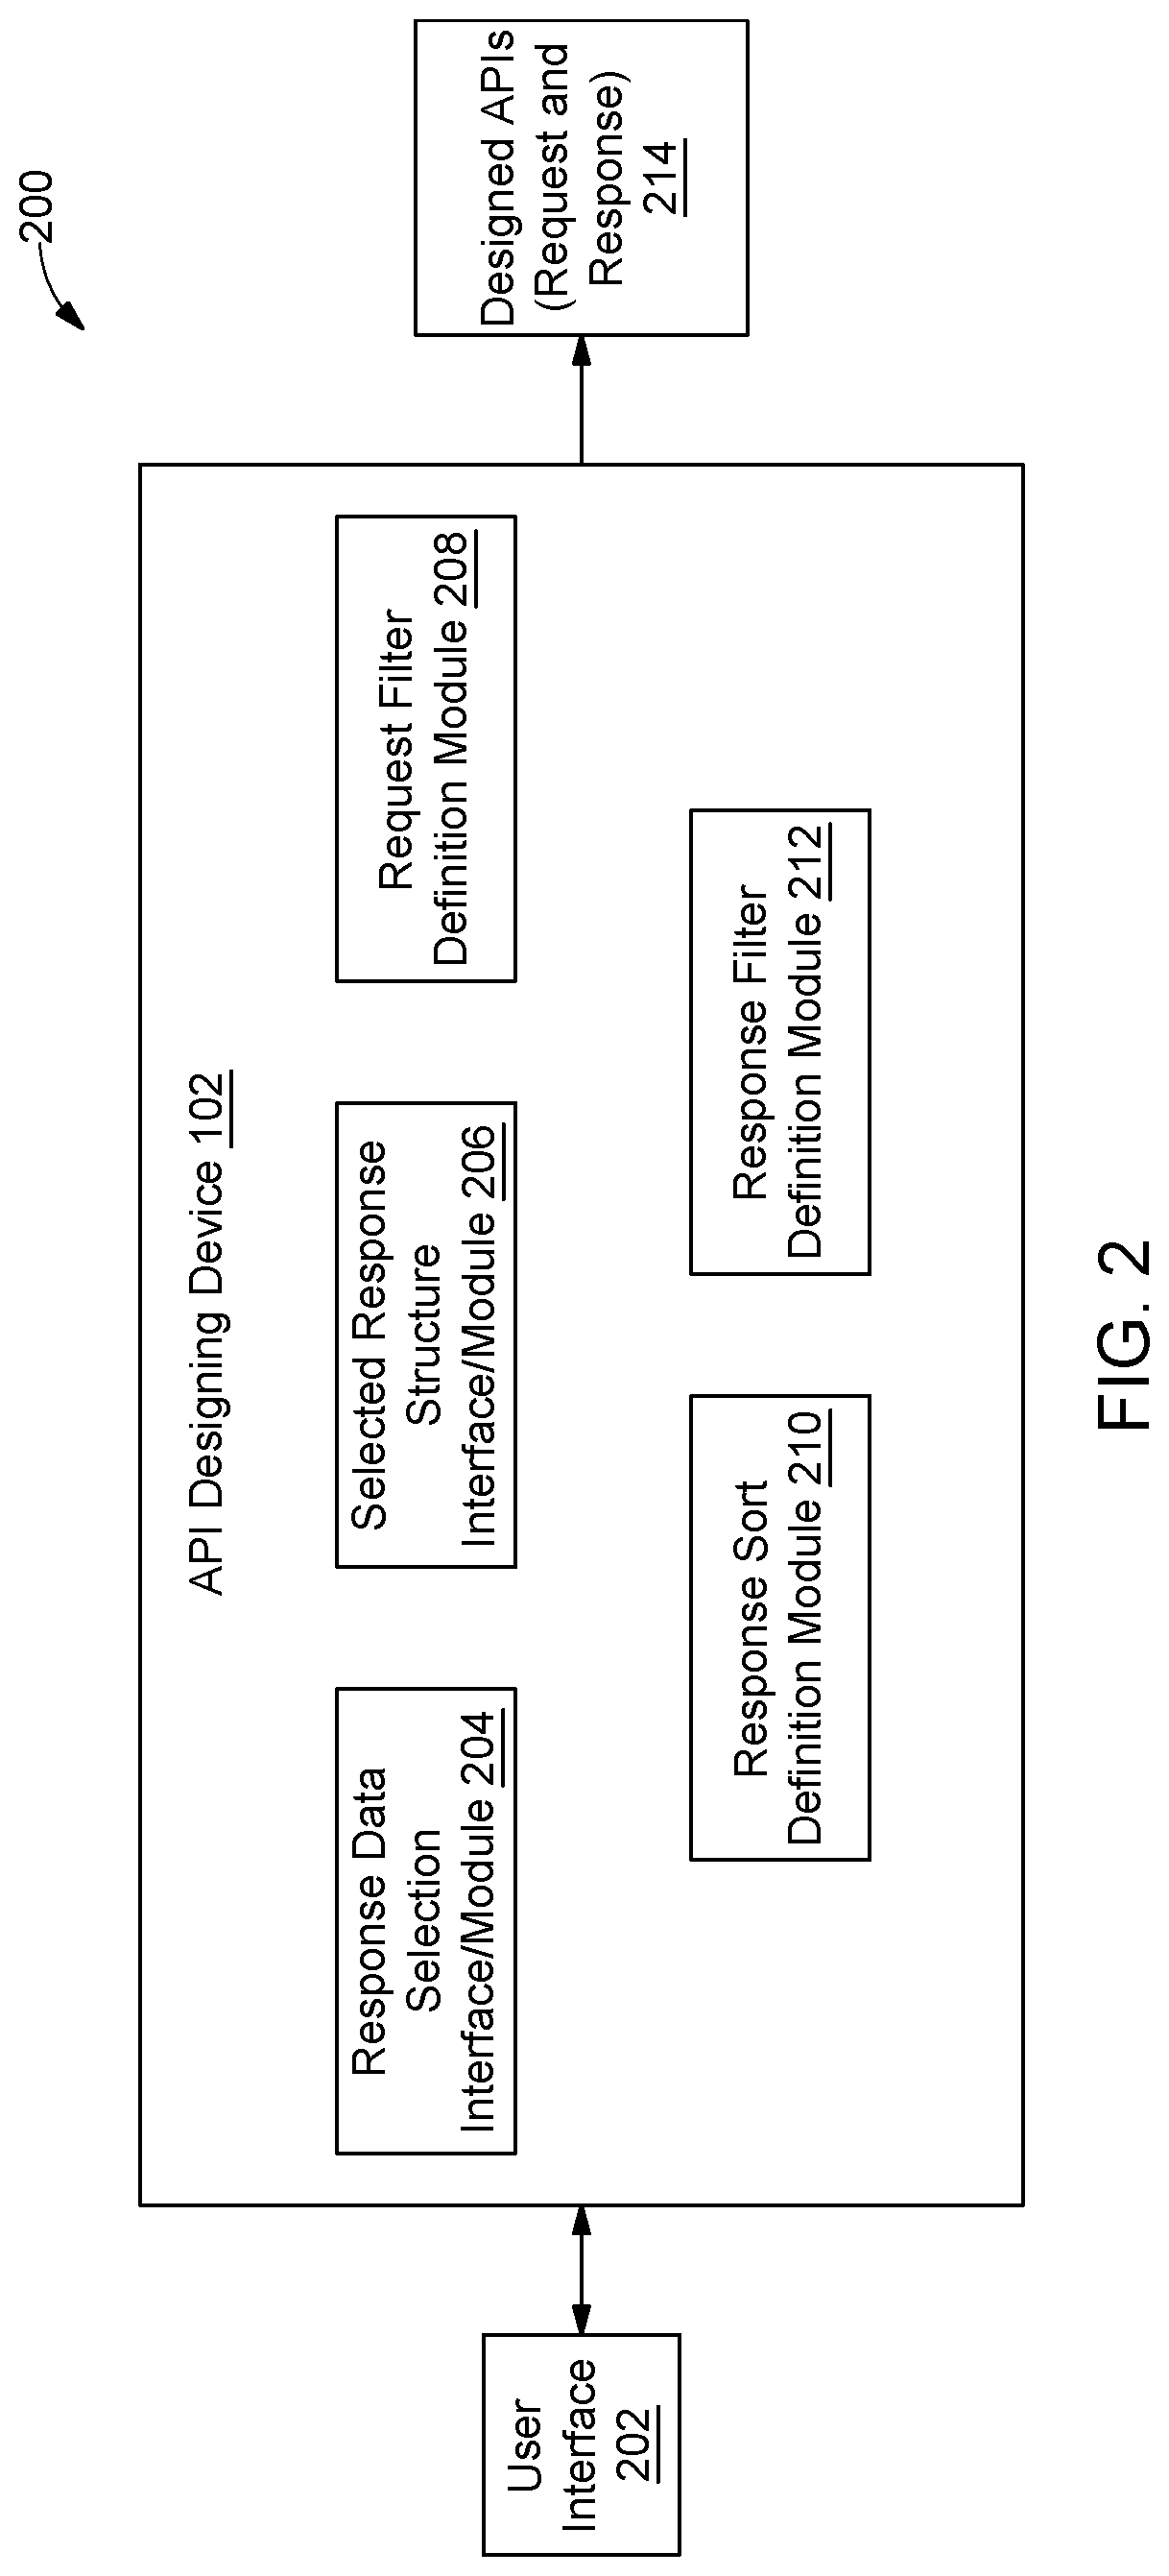 System and method for designing and developing application programming interface